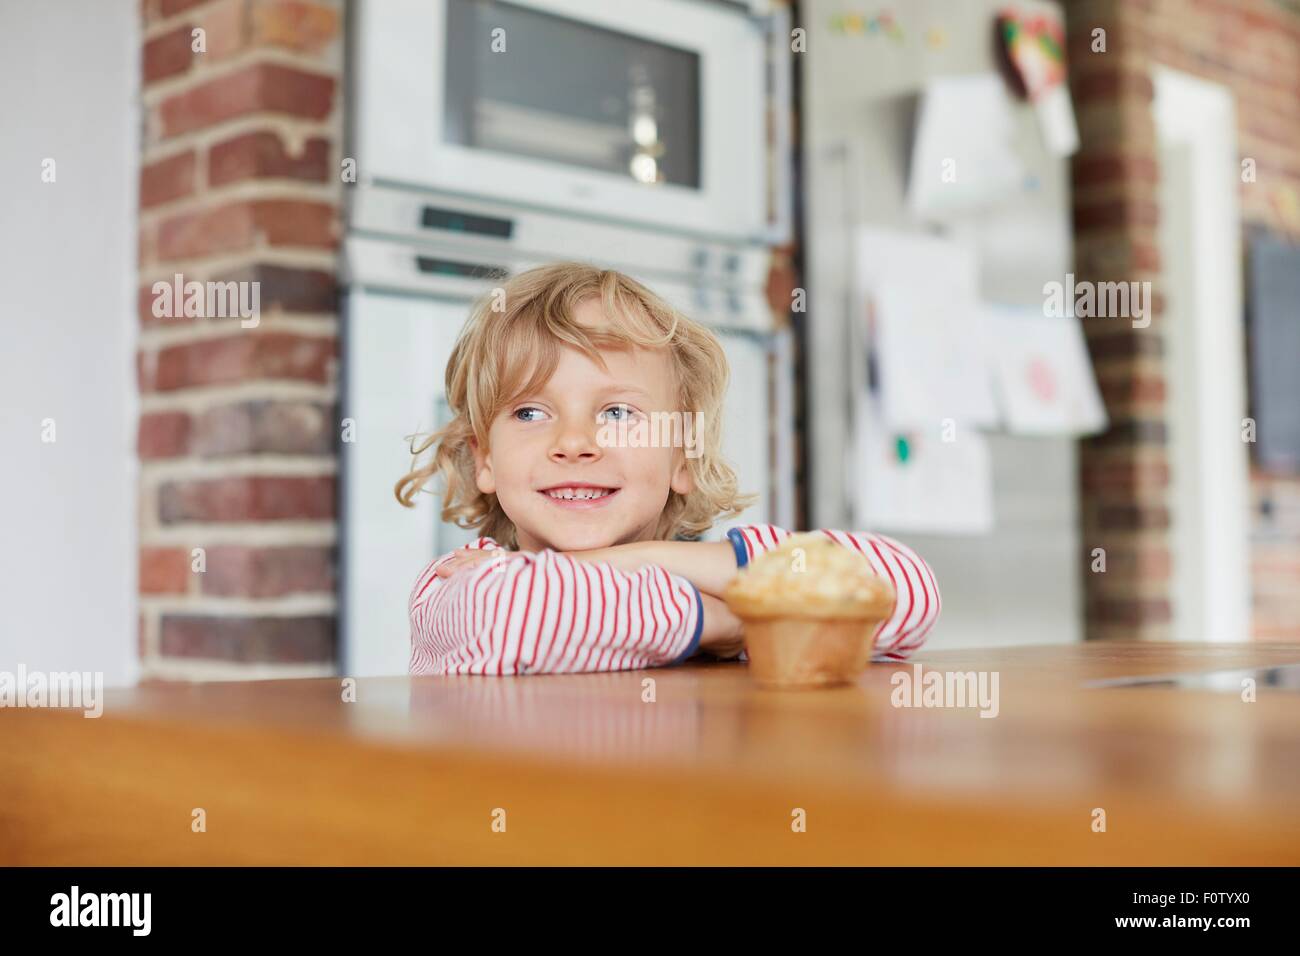 Young boy standing by kitchen counter,with muffin on counter in front of him Stock Photo